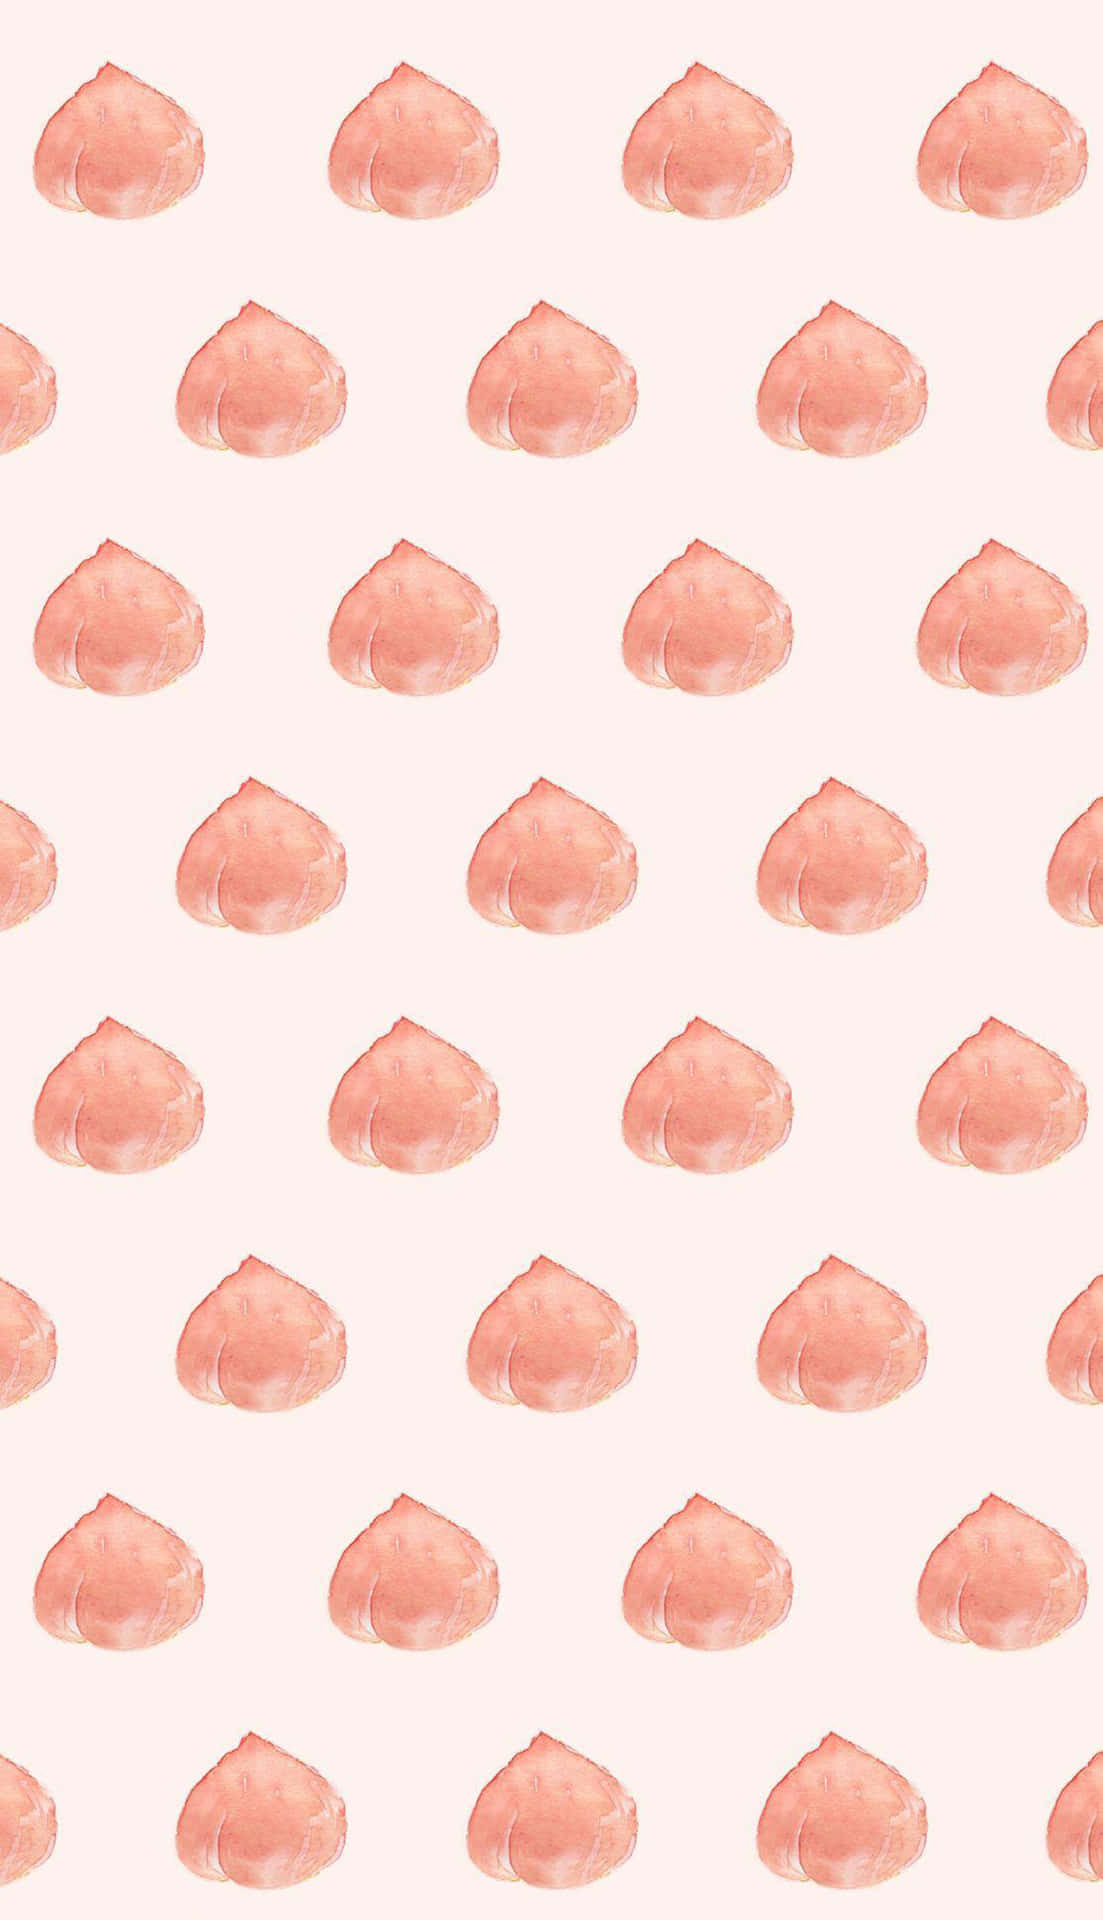 Enjoy a refreshing drink with this juicy and cute peach! Wallpaper